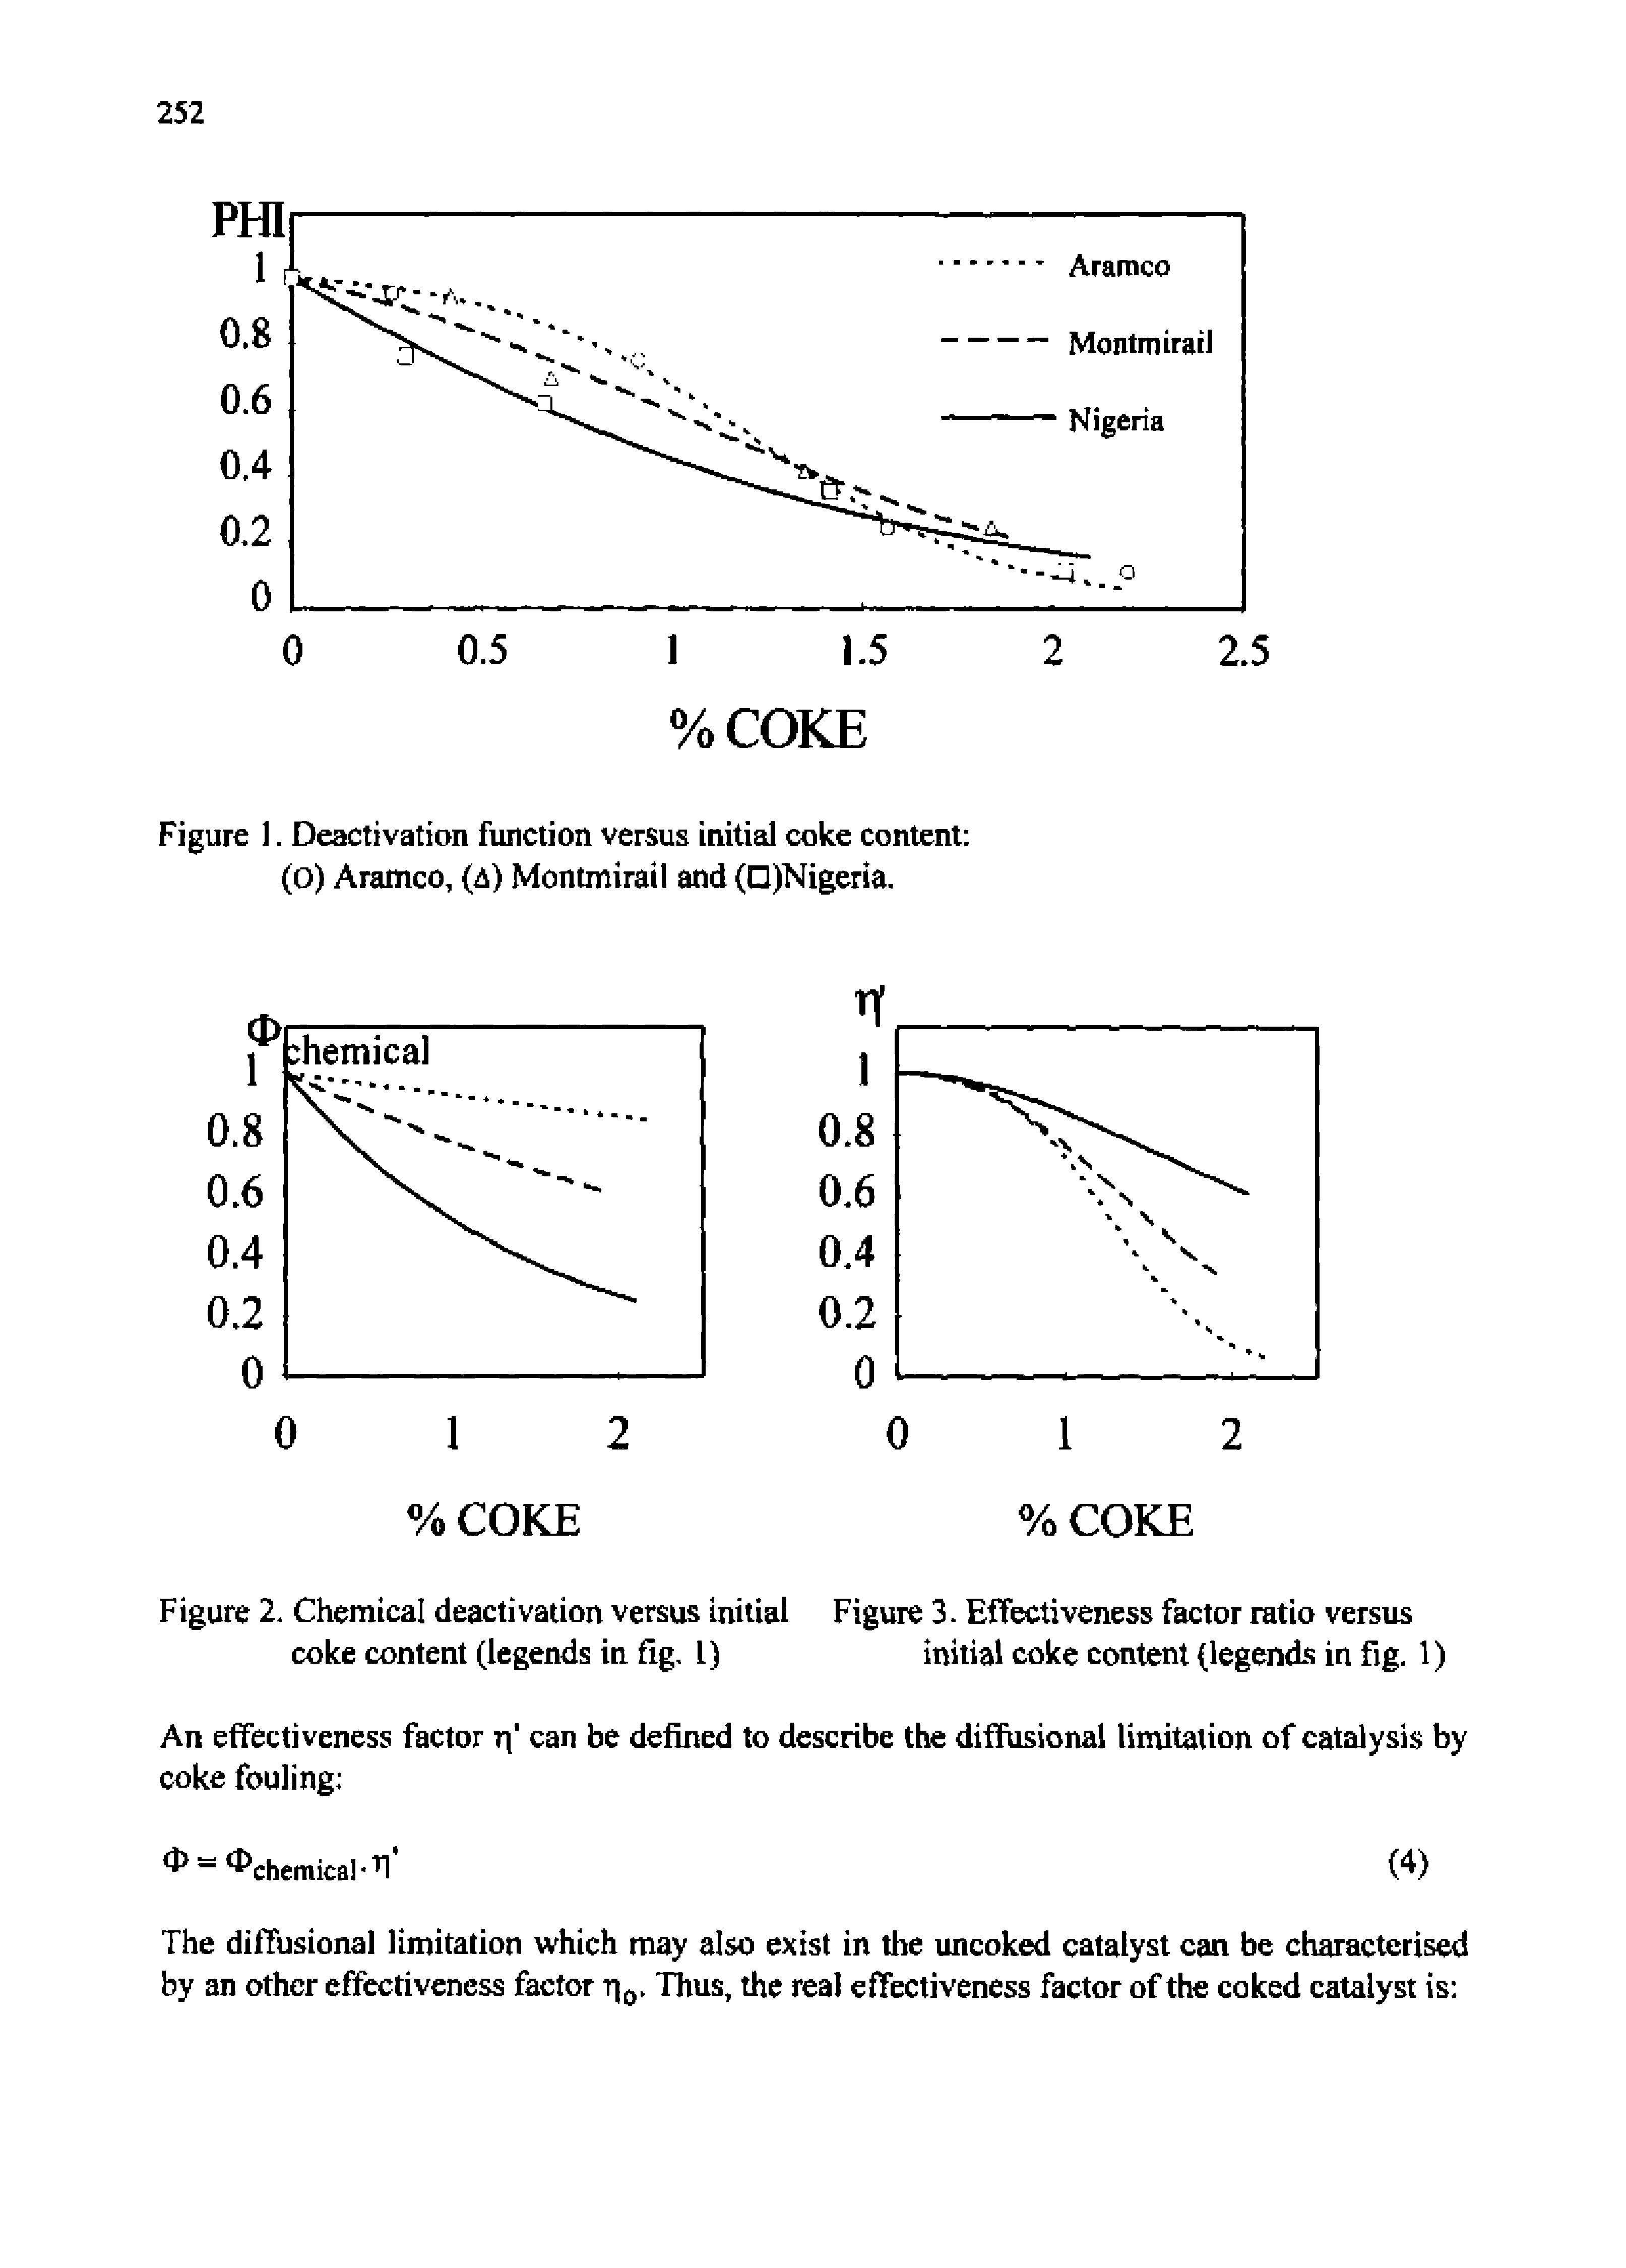 Figure 1. Deactivation function versus initial coke content (O) Aramco, (A) Montmirail and (D)Nigeria.